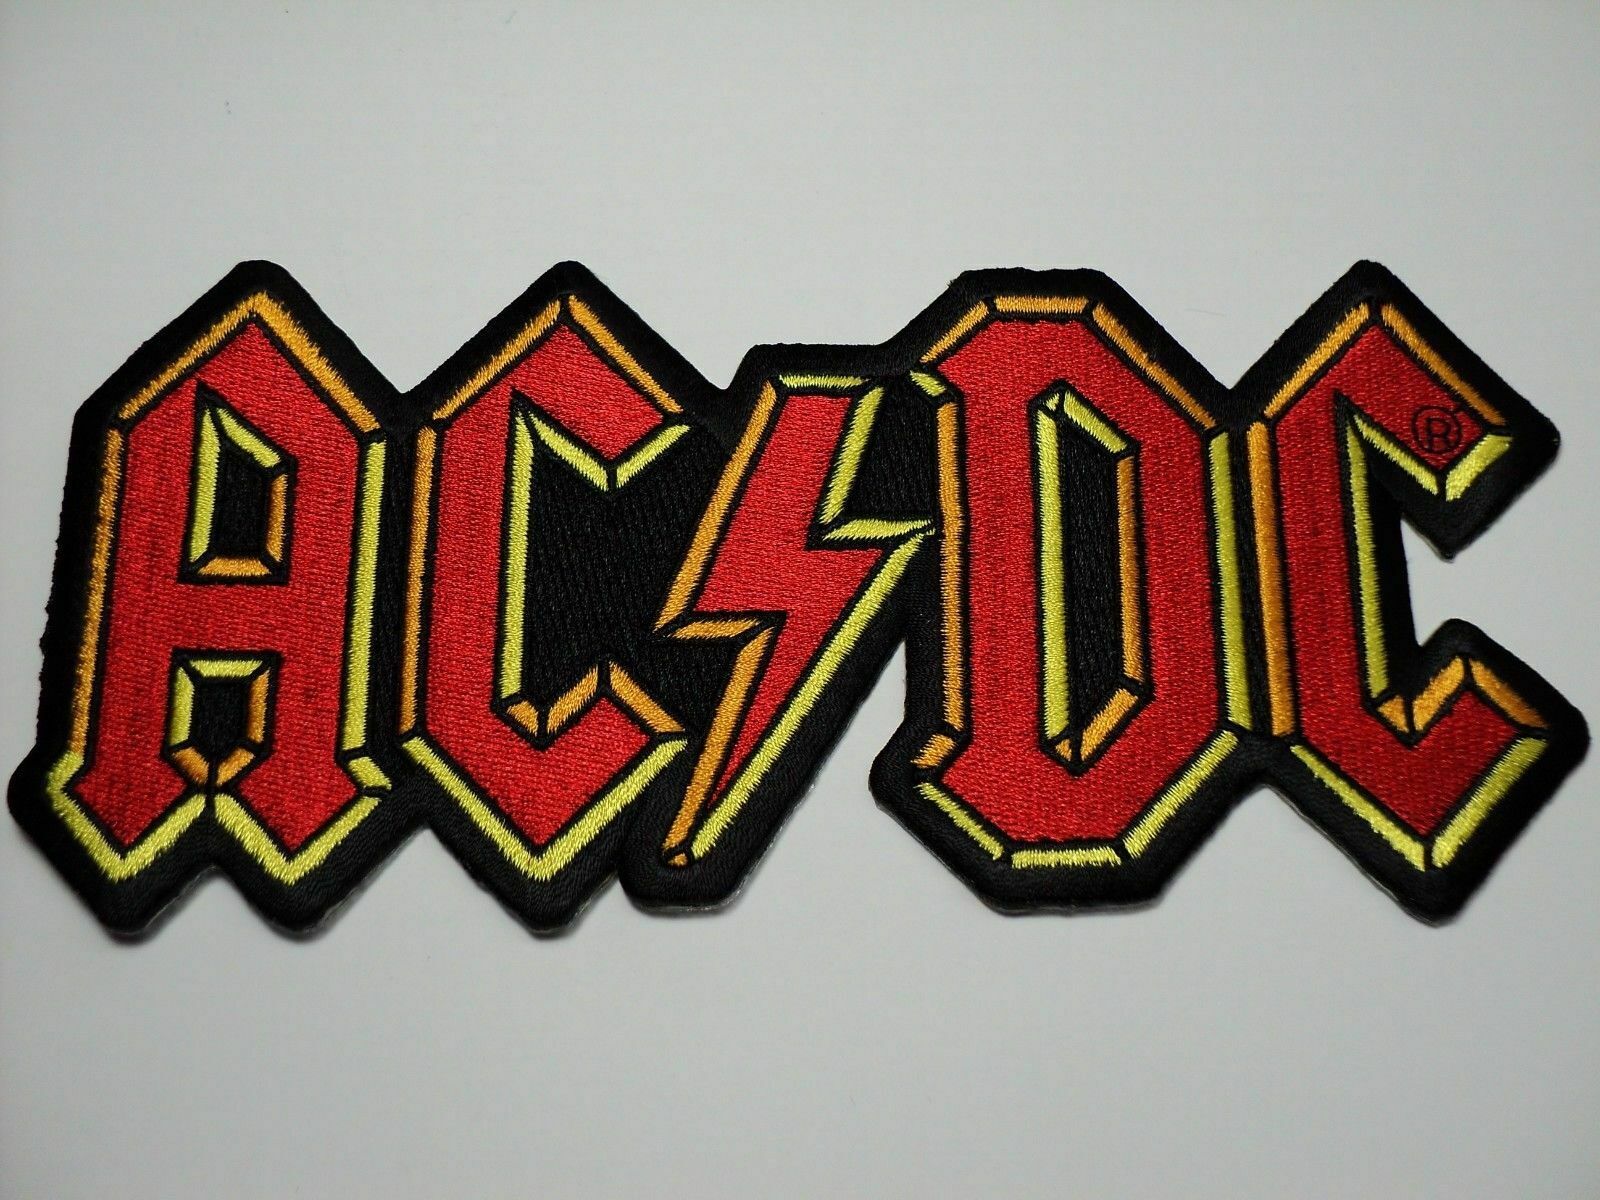 Ac/dc Embroidered Patrch - Vintage -  Rare Find